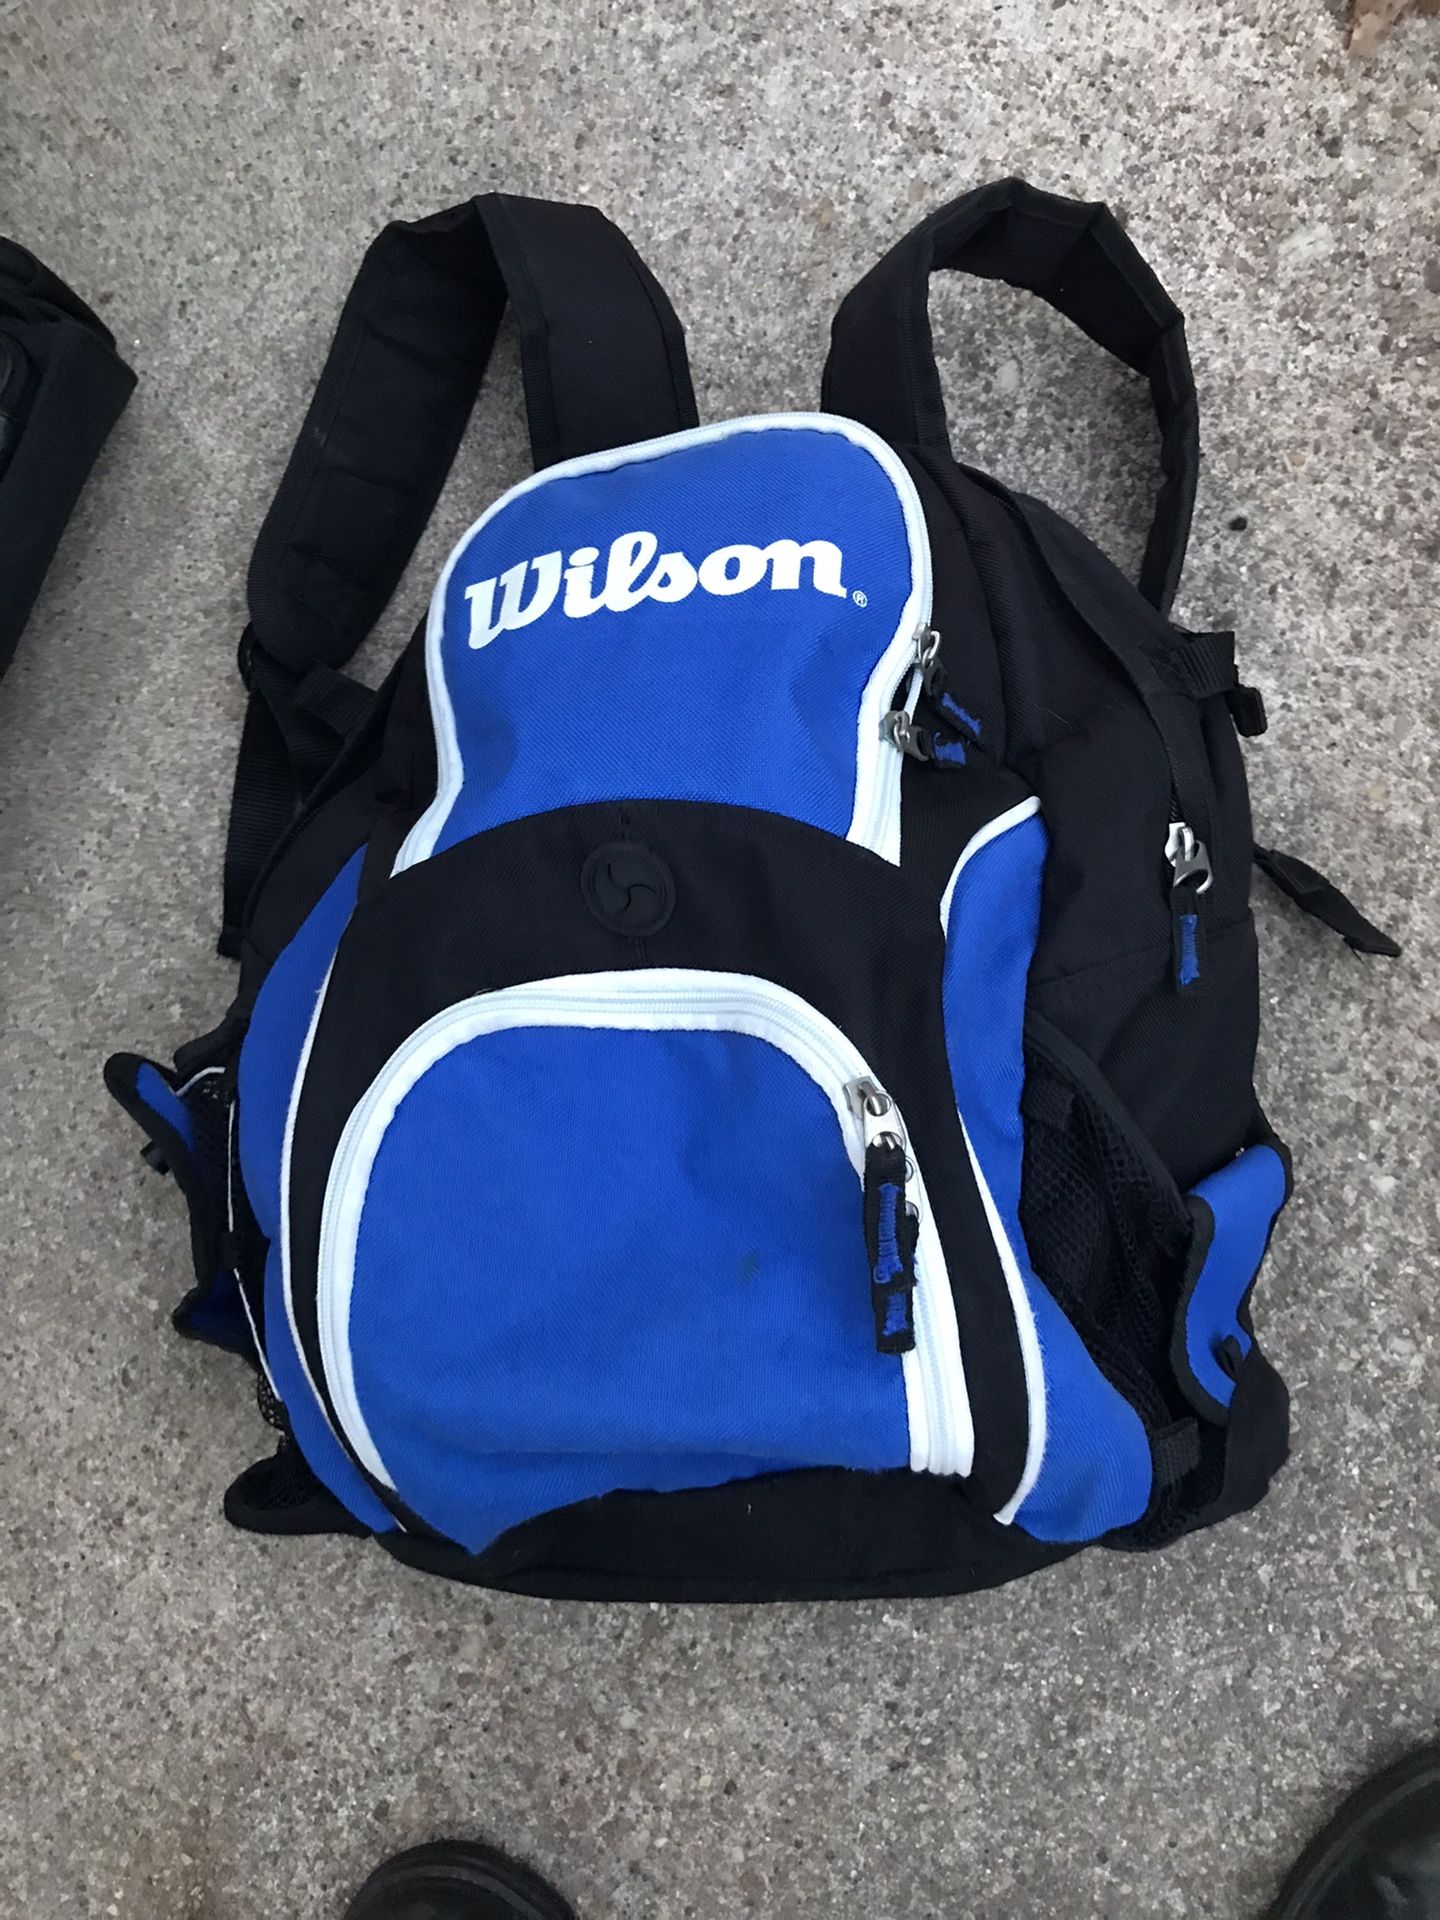 Like New Wilson Backpack Large Heavy Duty Only $30